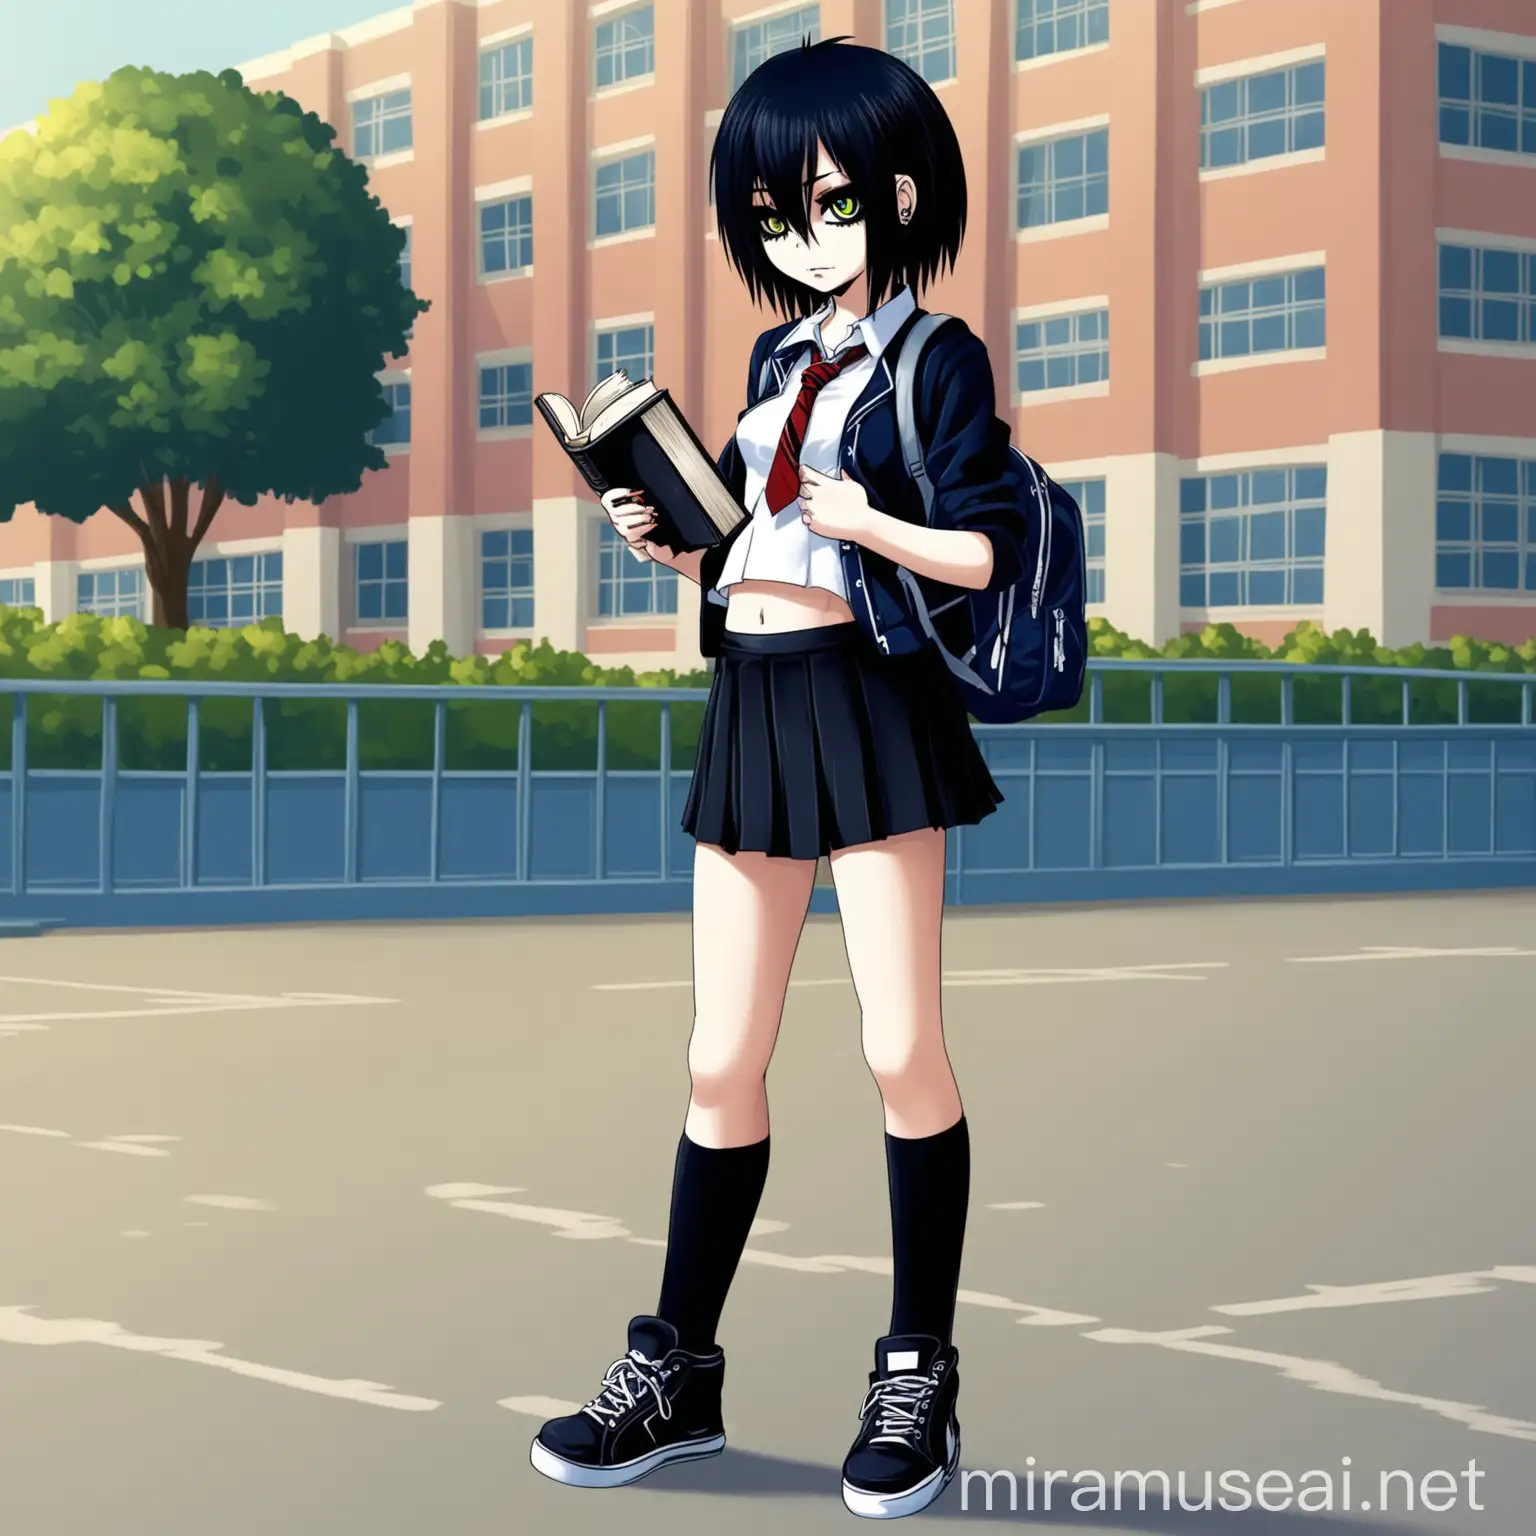 Emo Highschool Girl Holding Book in Tight Clothes Against School Background